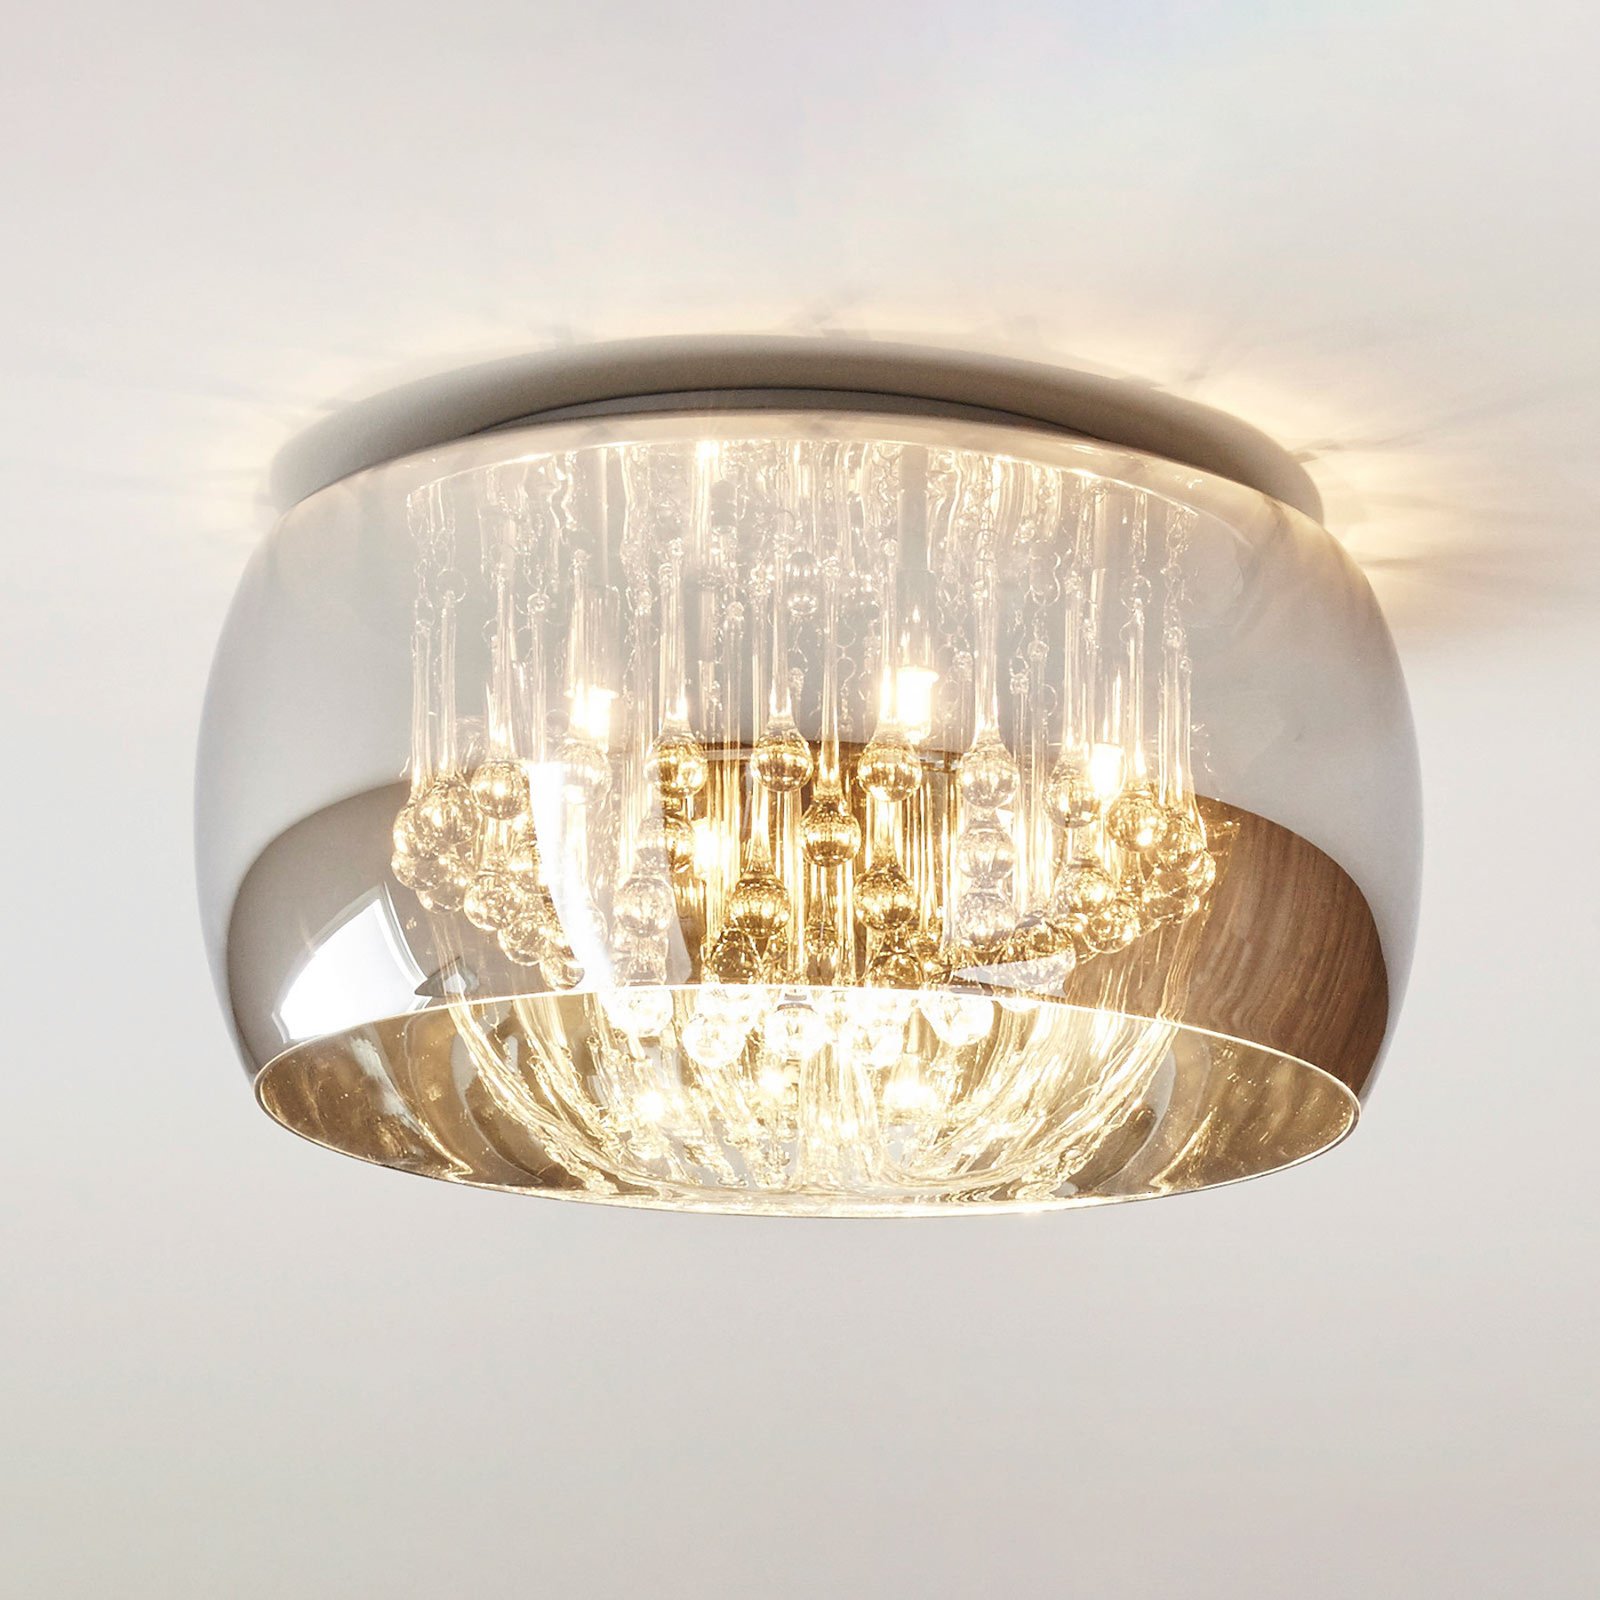 Pearl ceiling light made of glass, Ø 50 cm